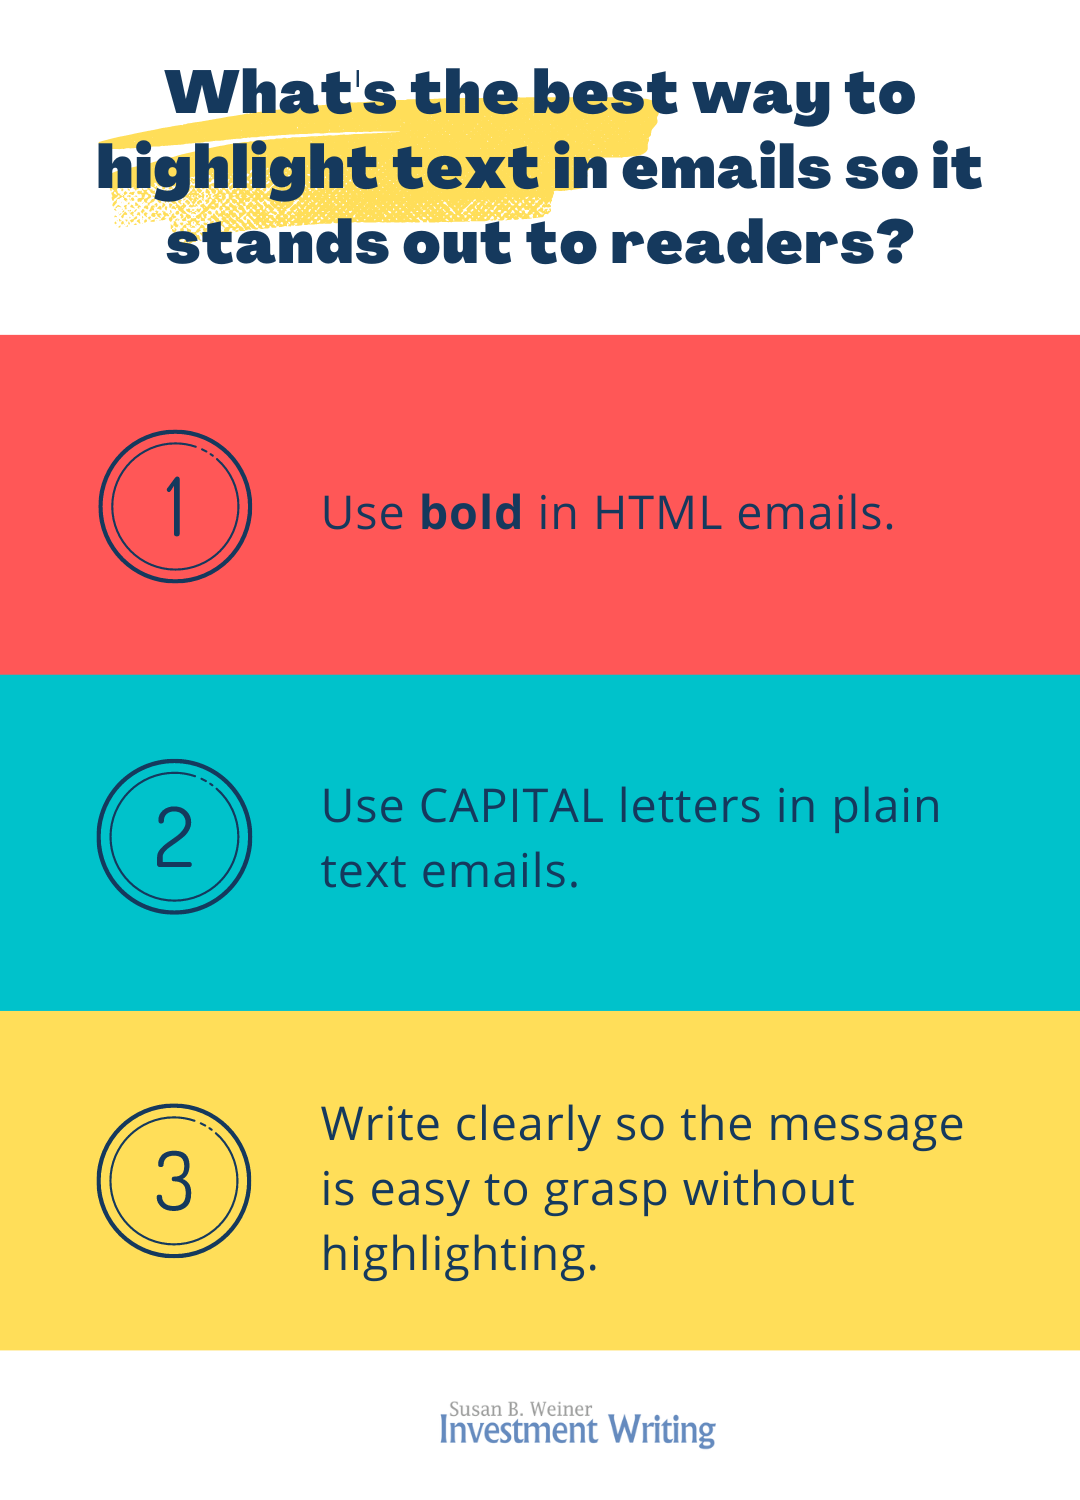 How to highlight text in emails